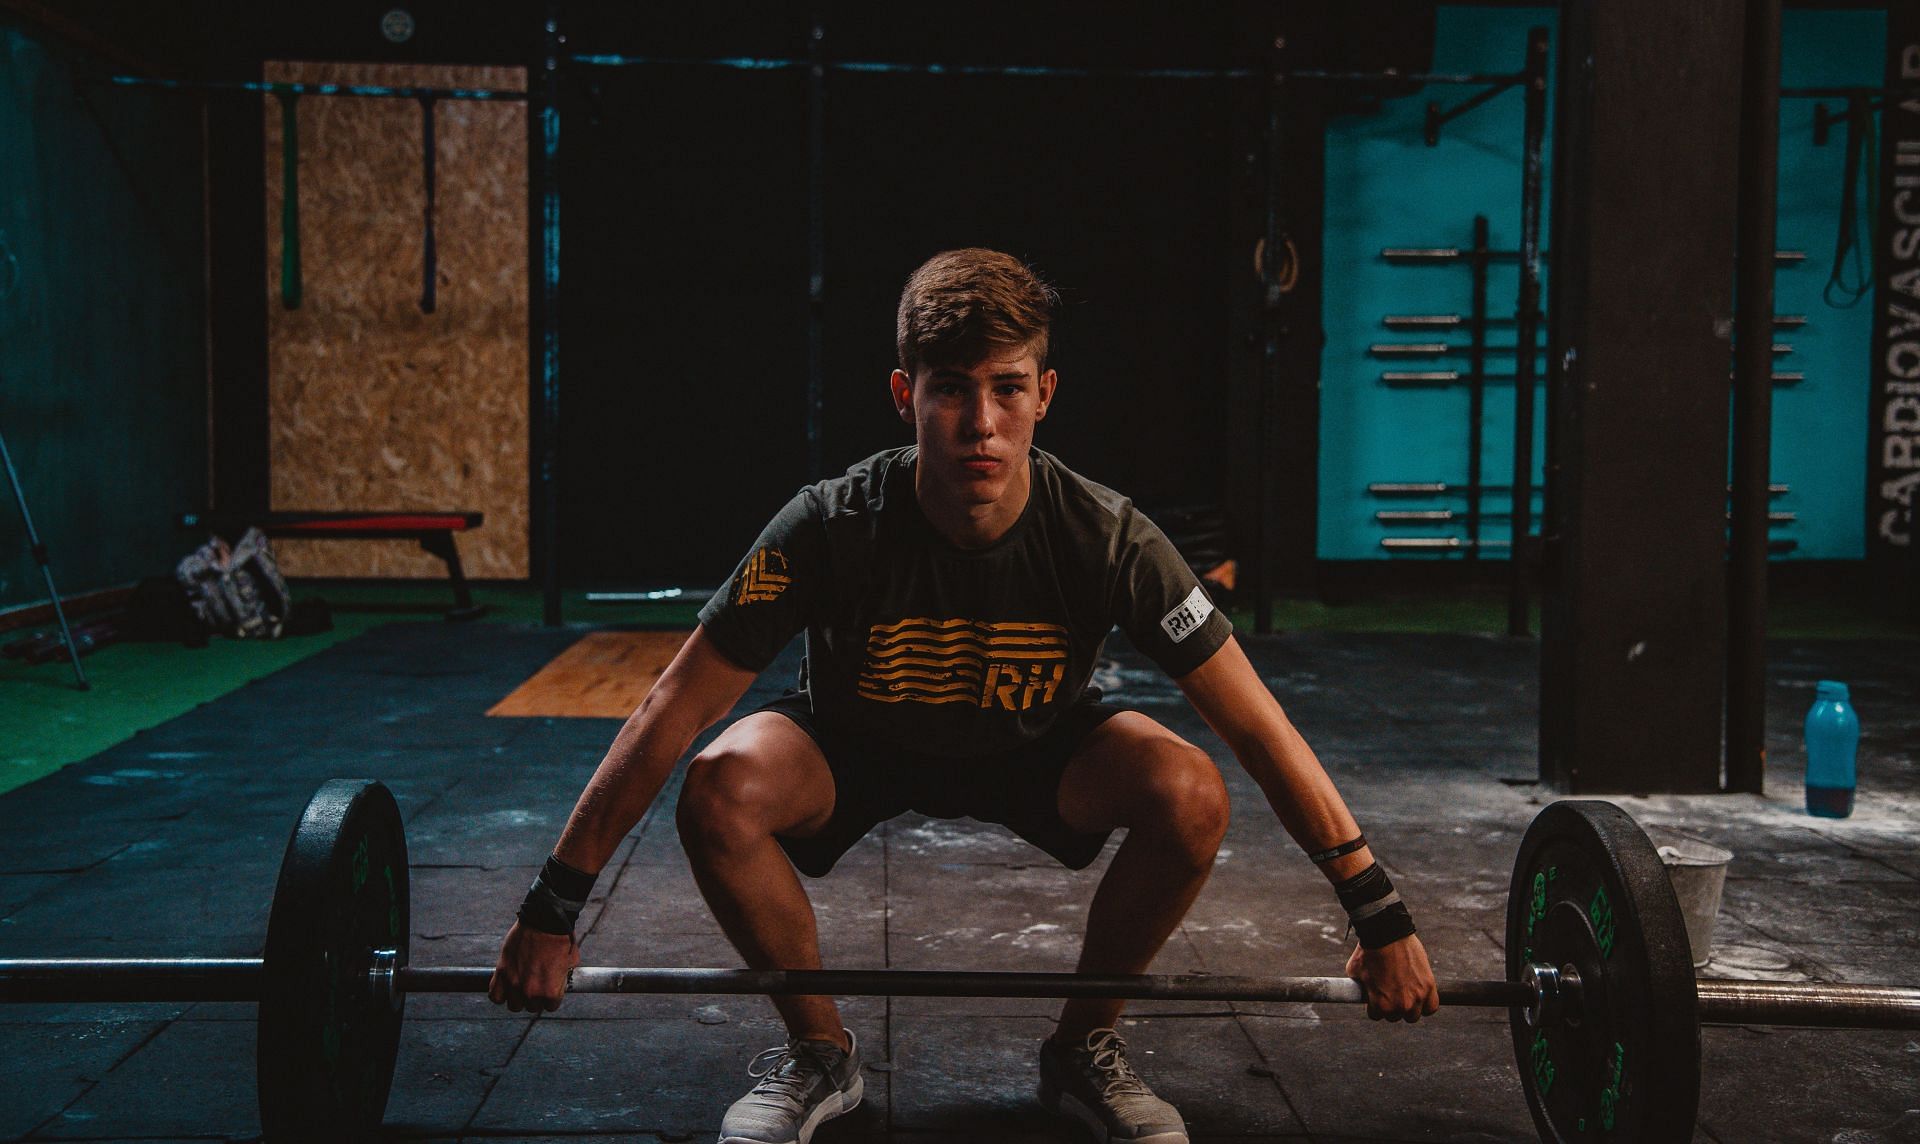 Squat exercises may focus mostly on your legs, but they also train your abs as well as obliques. (Image via Unsplash/ Luis Vidal)